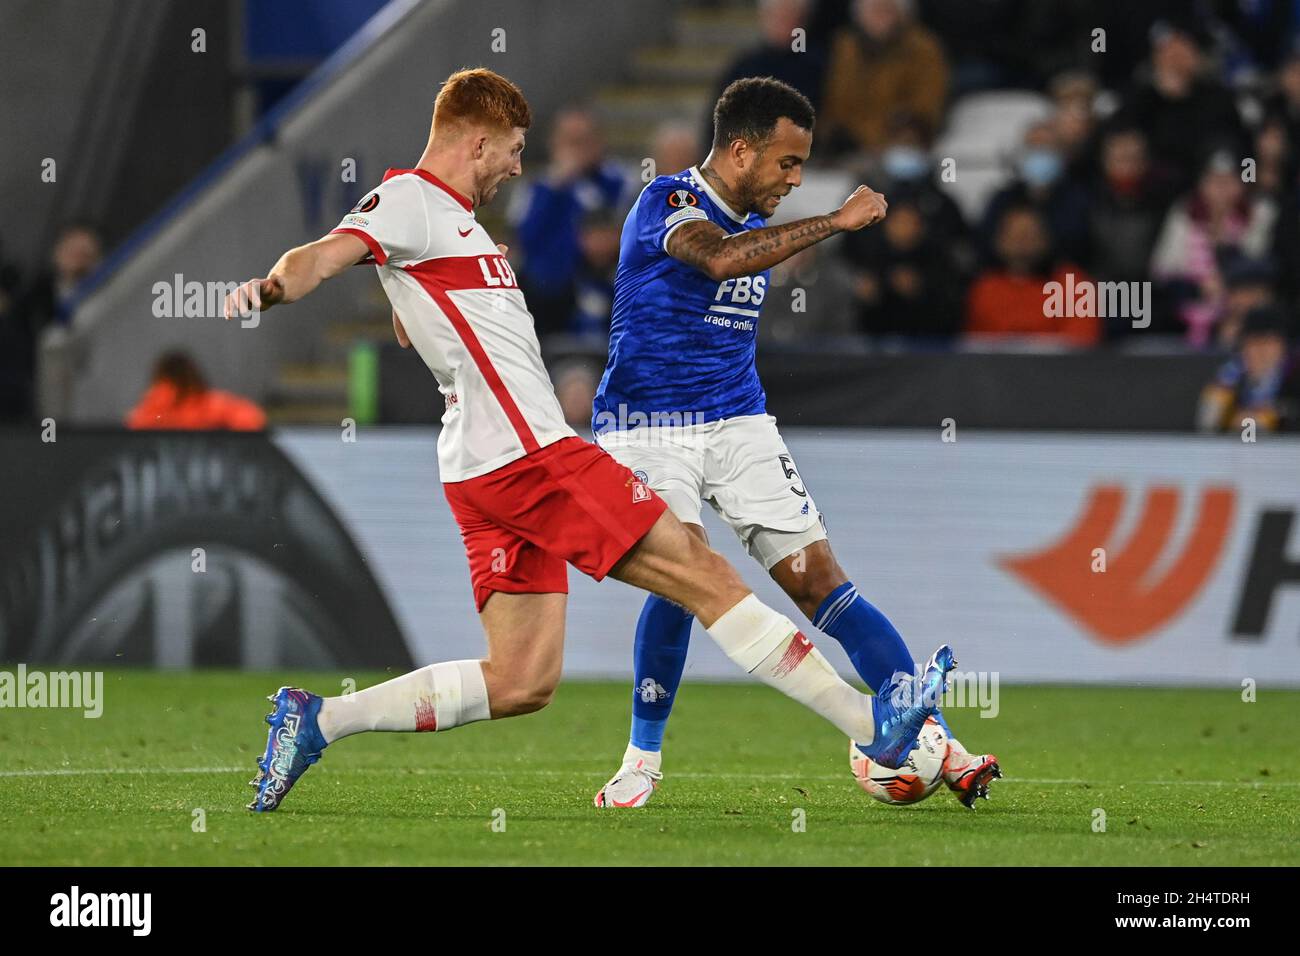 Ryan Bertrand #5 of Leicester City is tackled by Maximiliano Caufriez (3) of Spartak Moscow Stock Photo